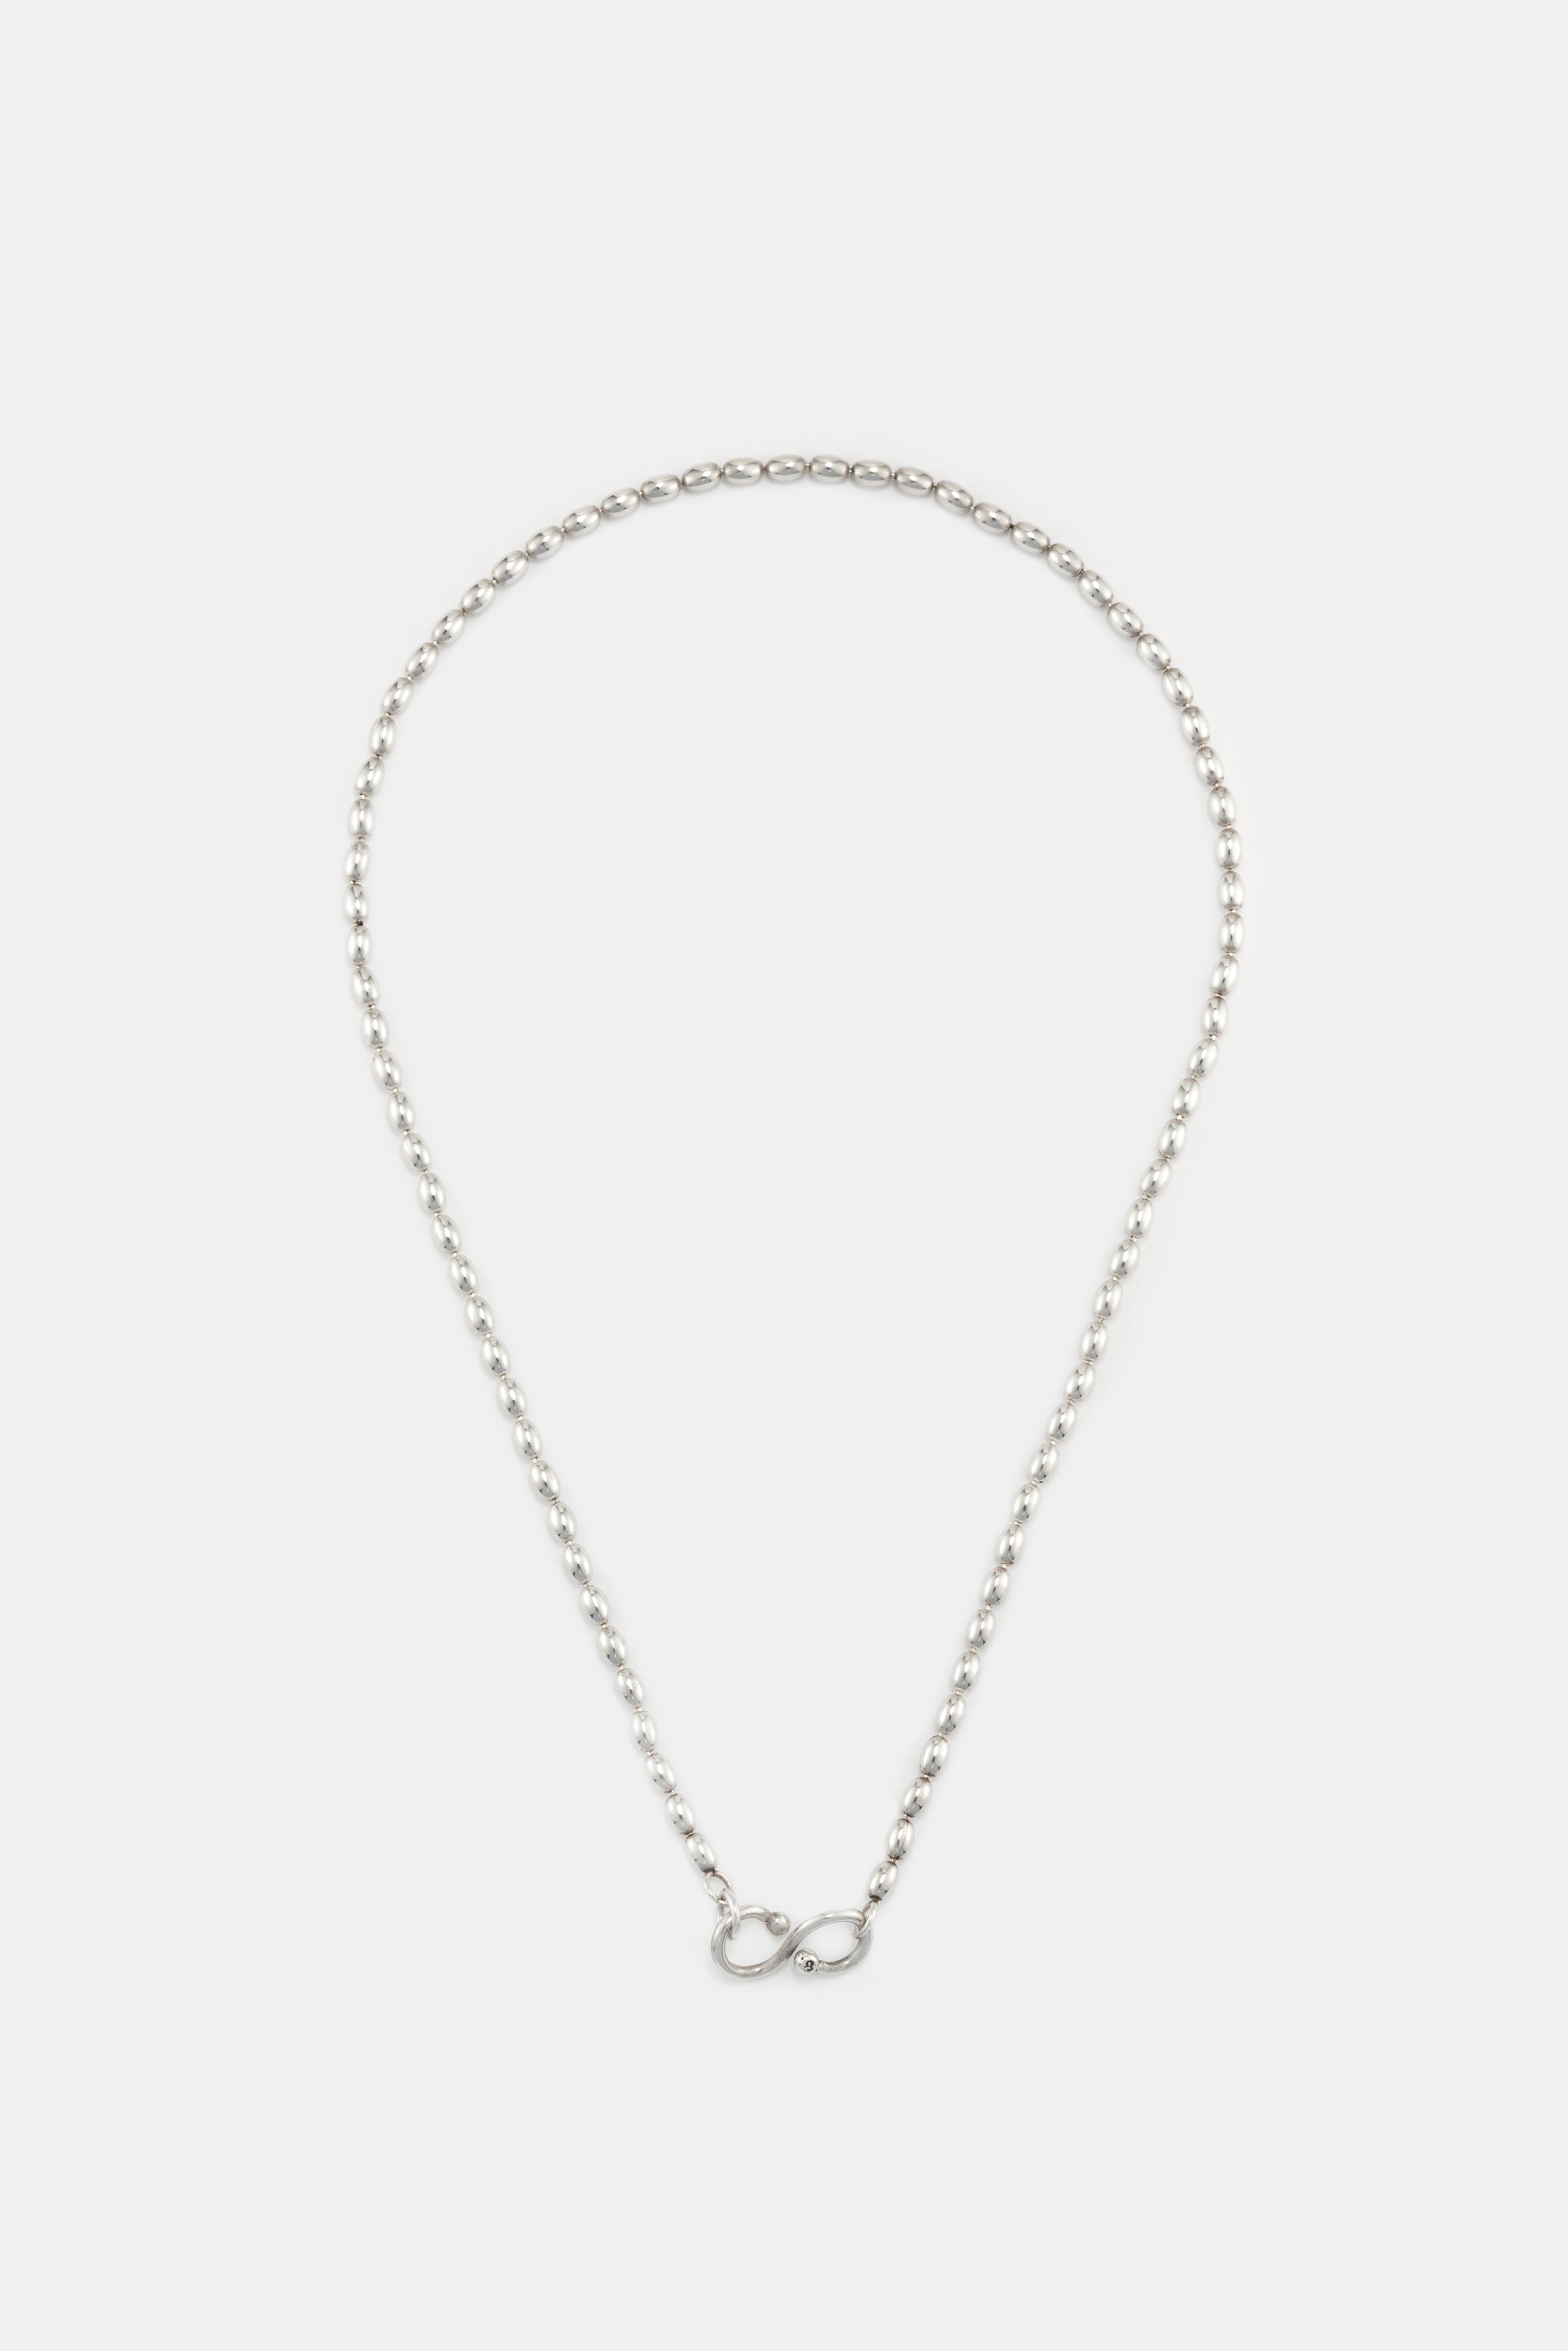 h'eres ヒアーズ V&CL NECKLACE ネックレス 45cm - アクセサリー